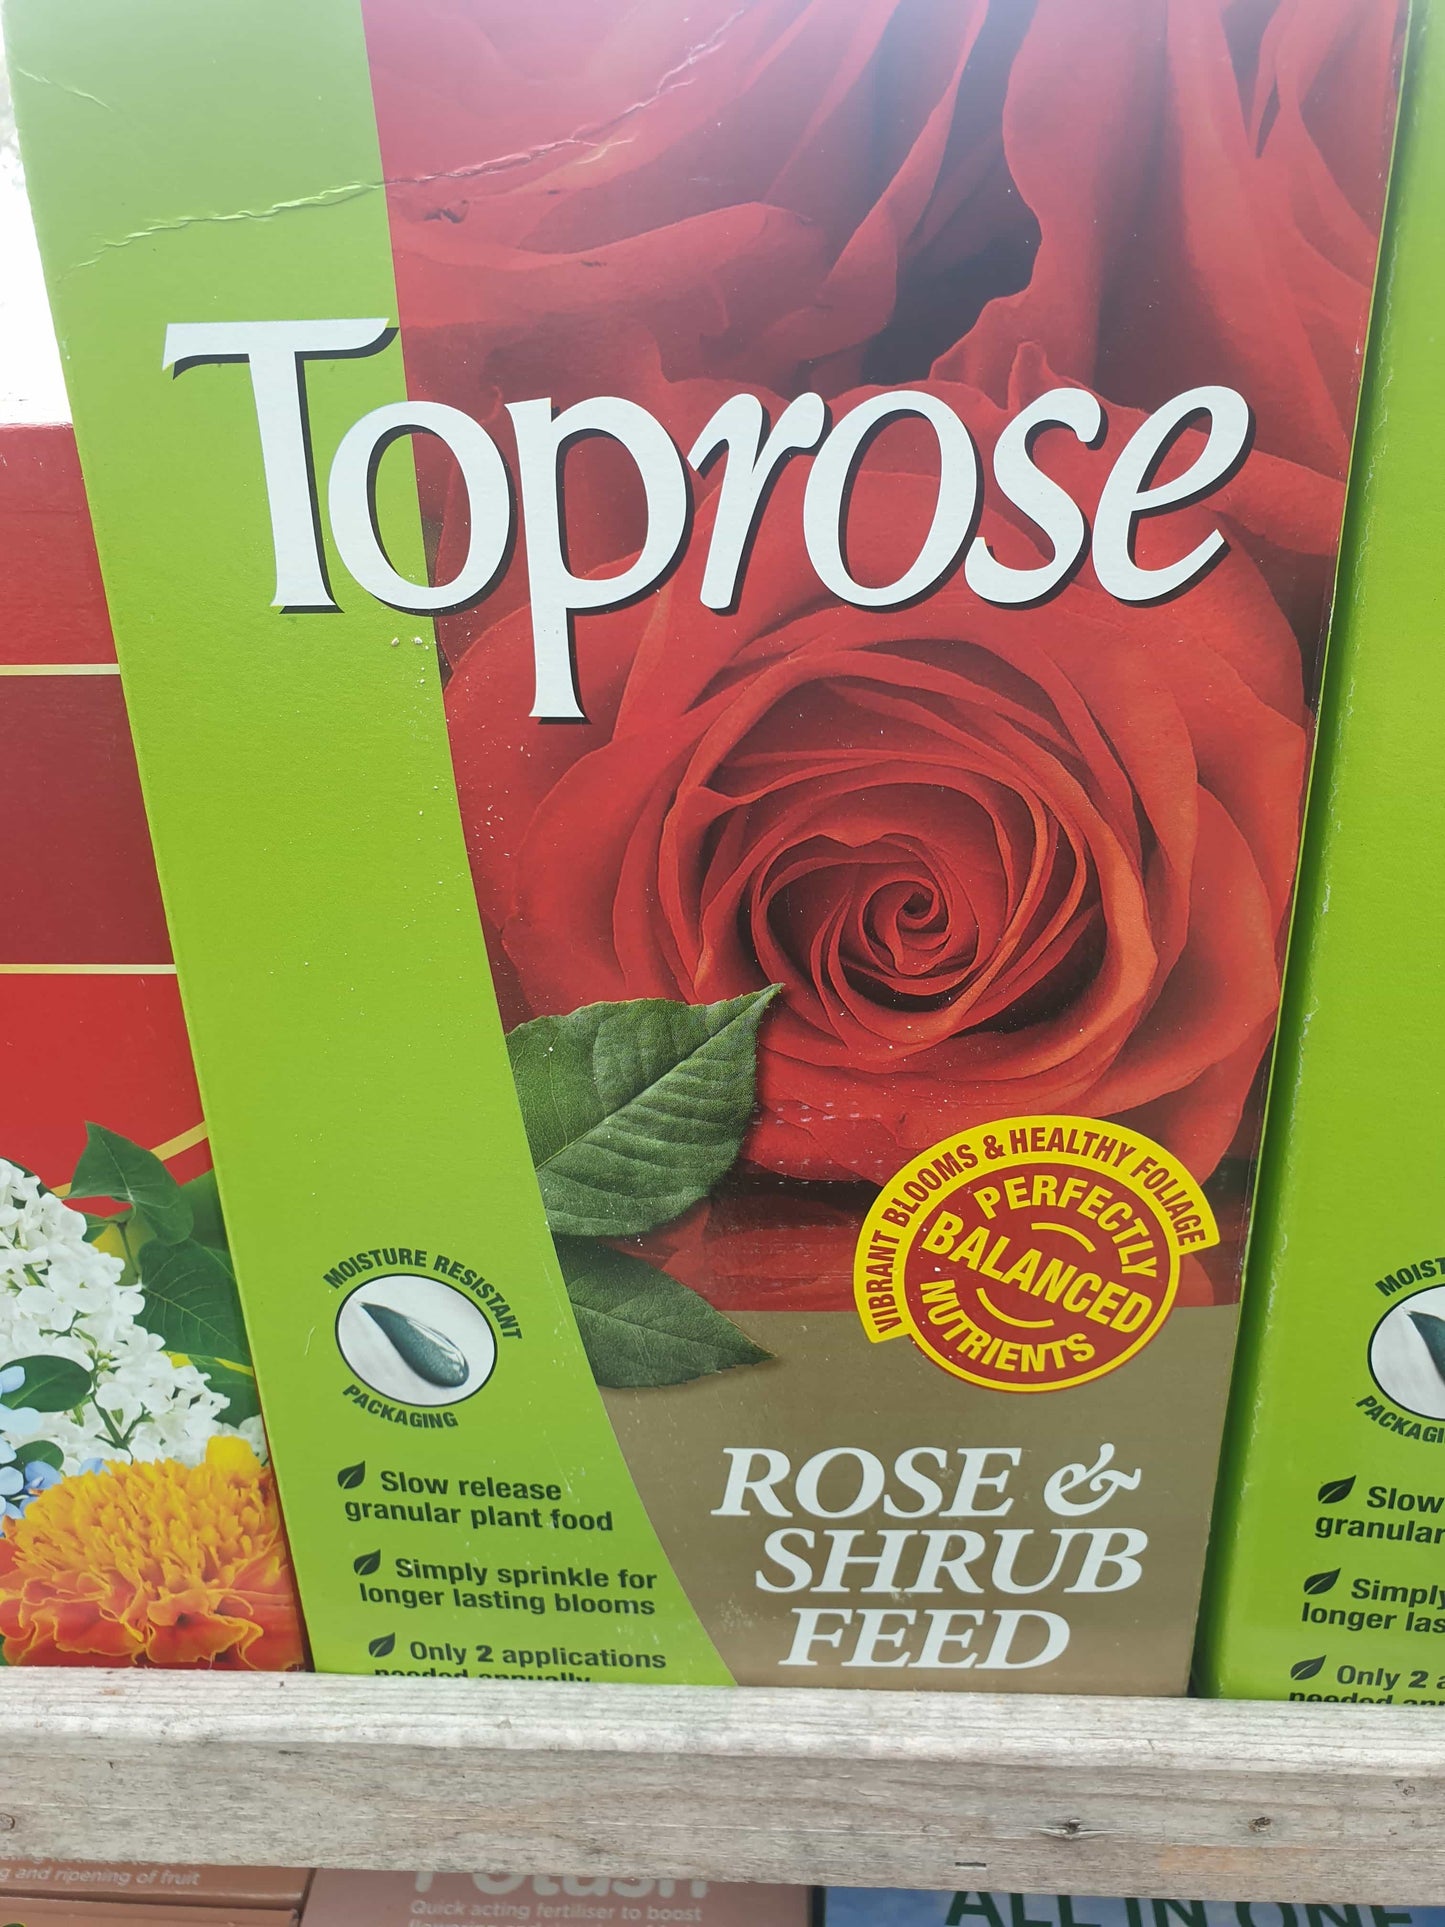 Toprose (rose and shrub feed)